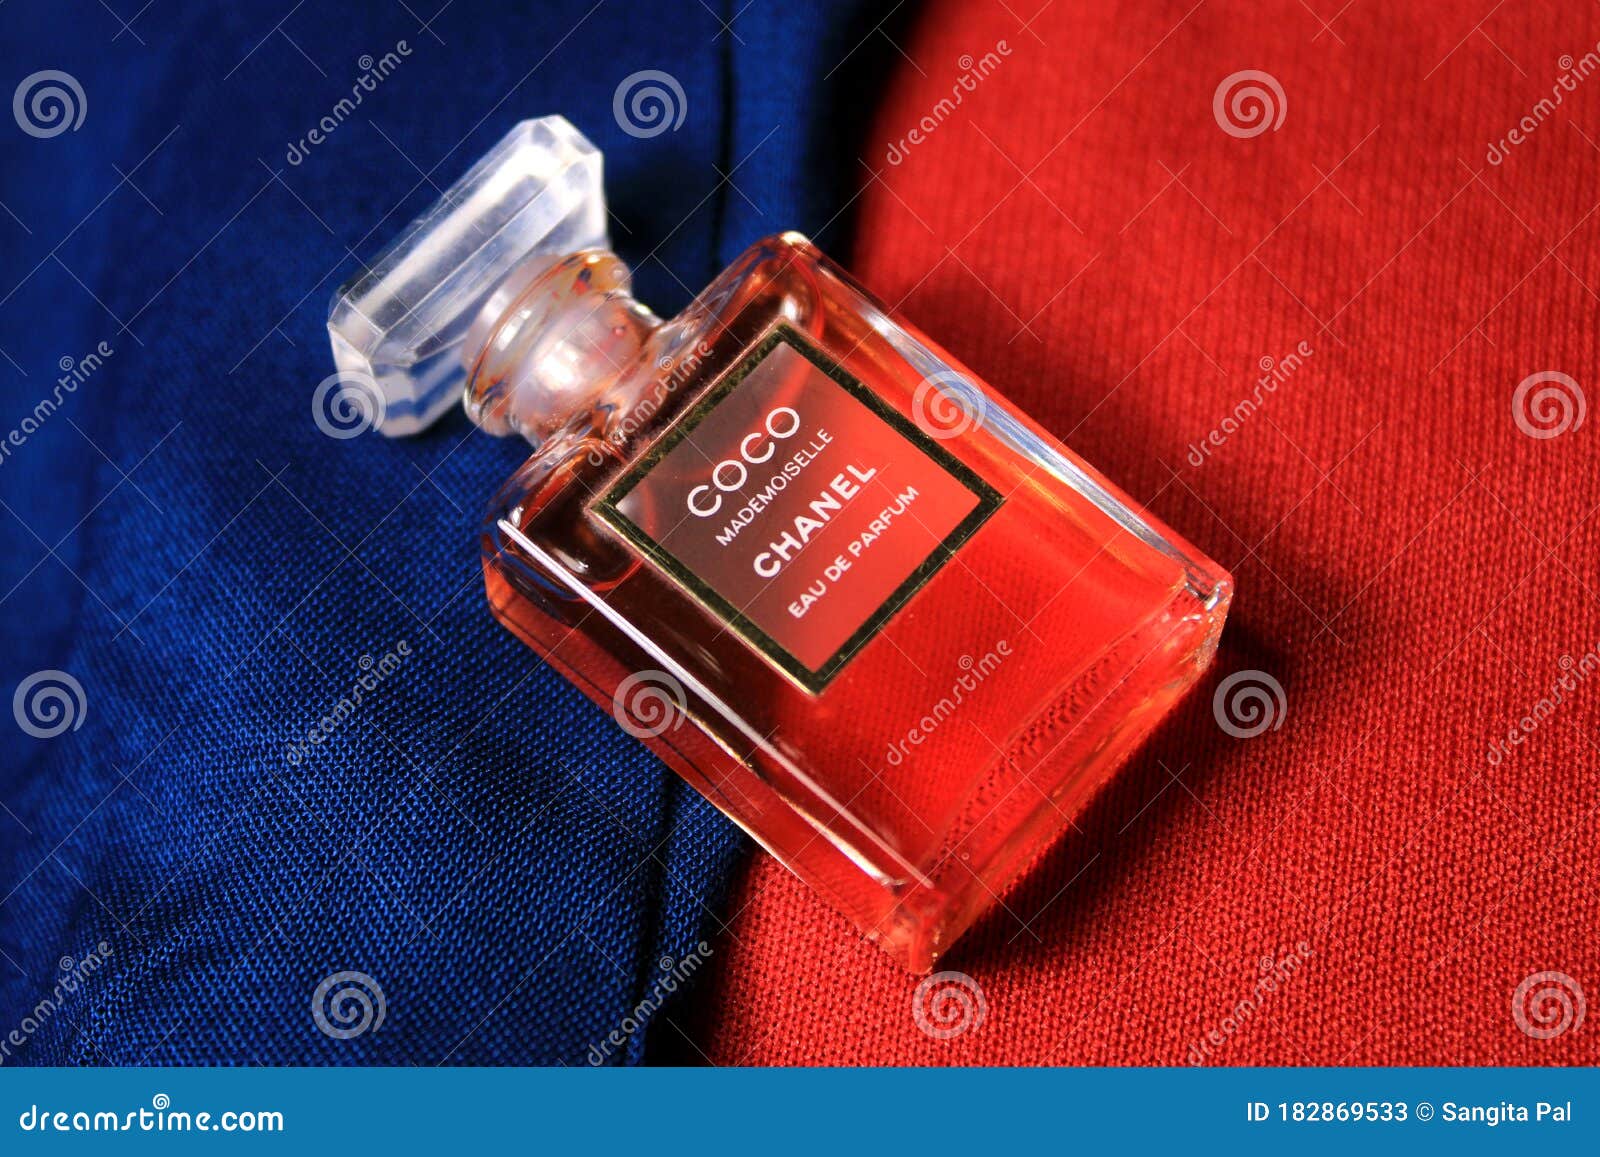 Chanel Perfume Bottle Isolated on Red & Blue Background. Bottle with ...